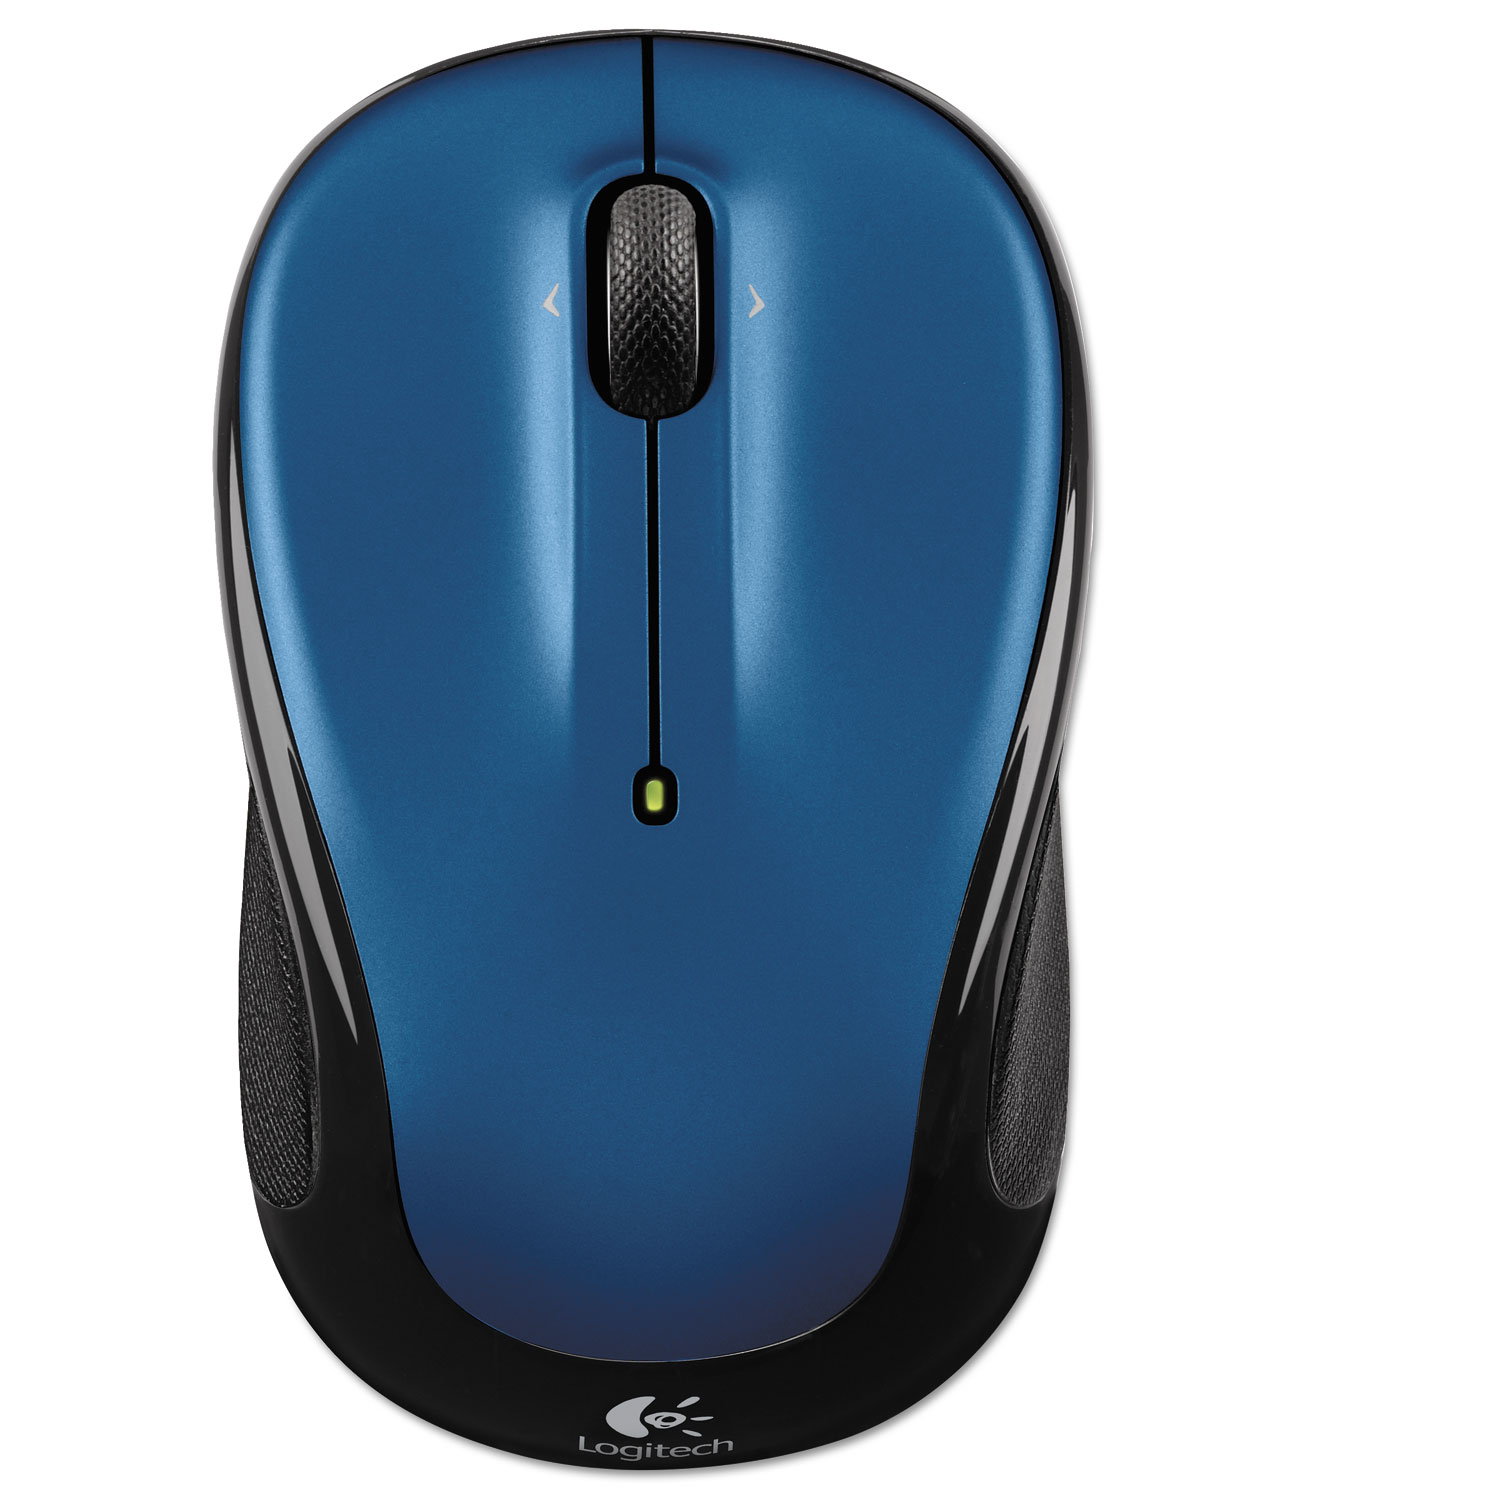 M325 Wireless Mouse, Right/Left, Blue